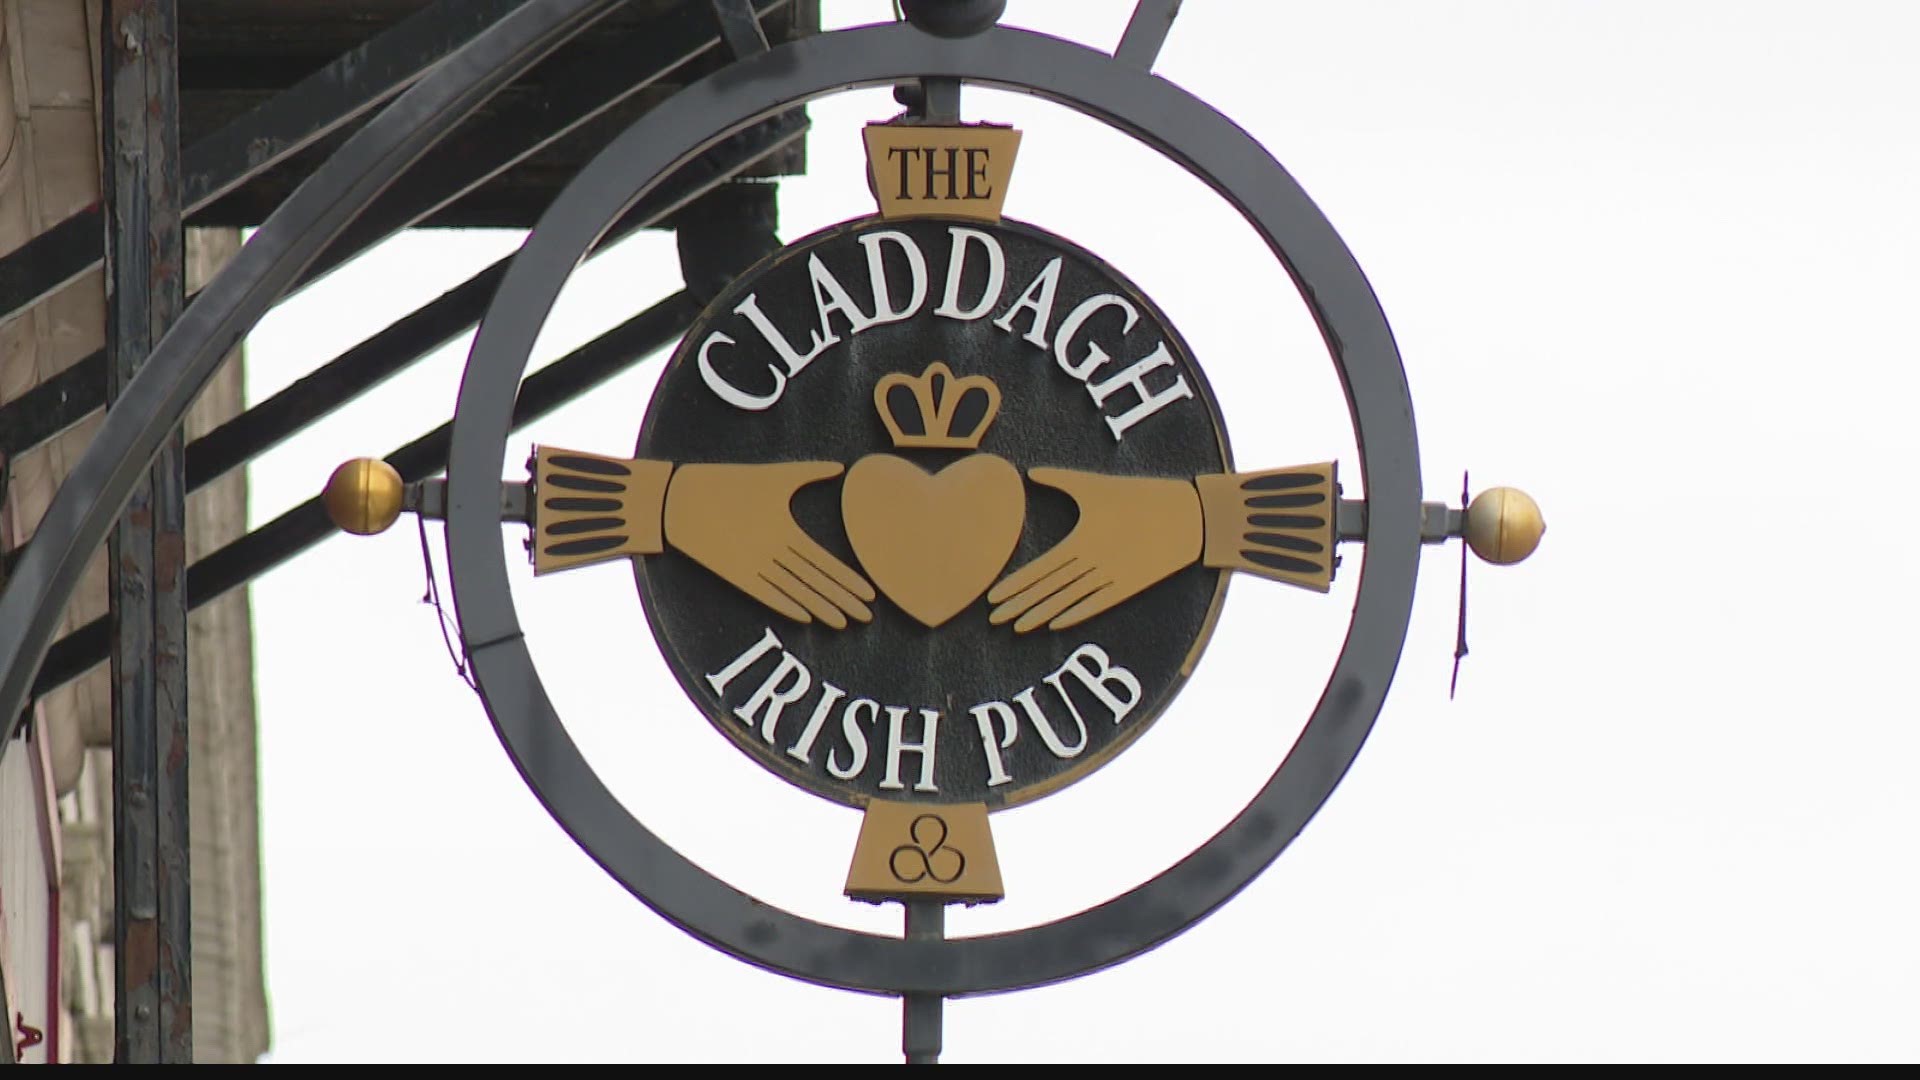 The Claddagh Irish Pub opened in downtown Indianapolis 20 years ago, but back in March it closed permanently.